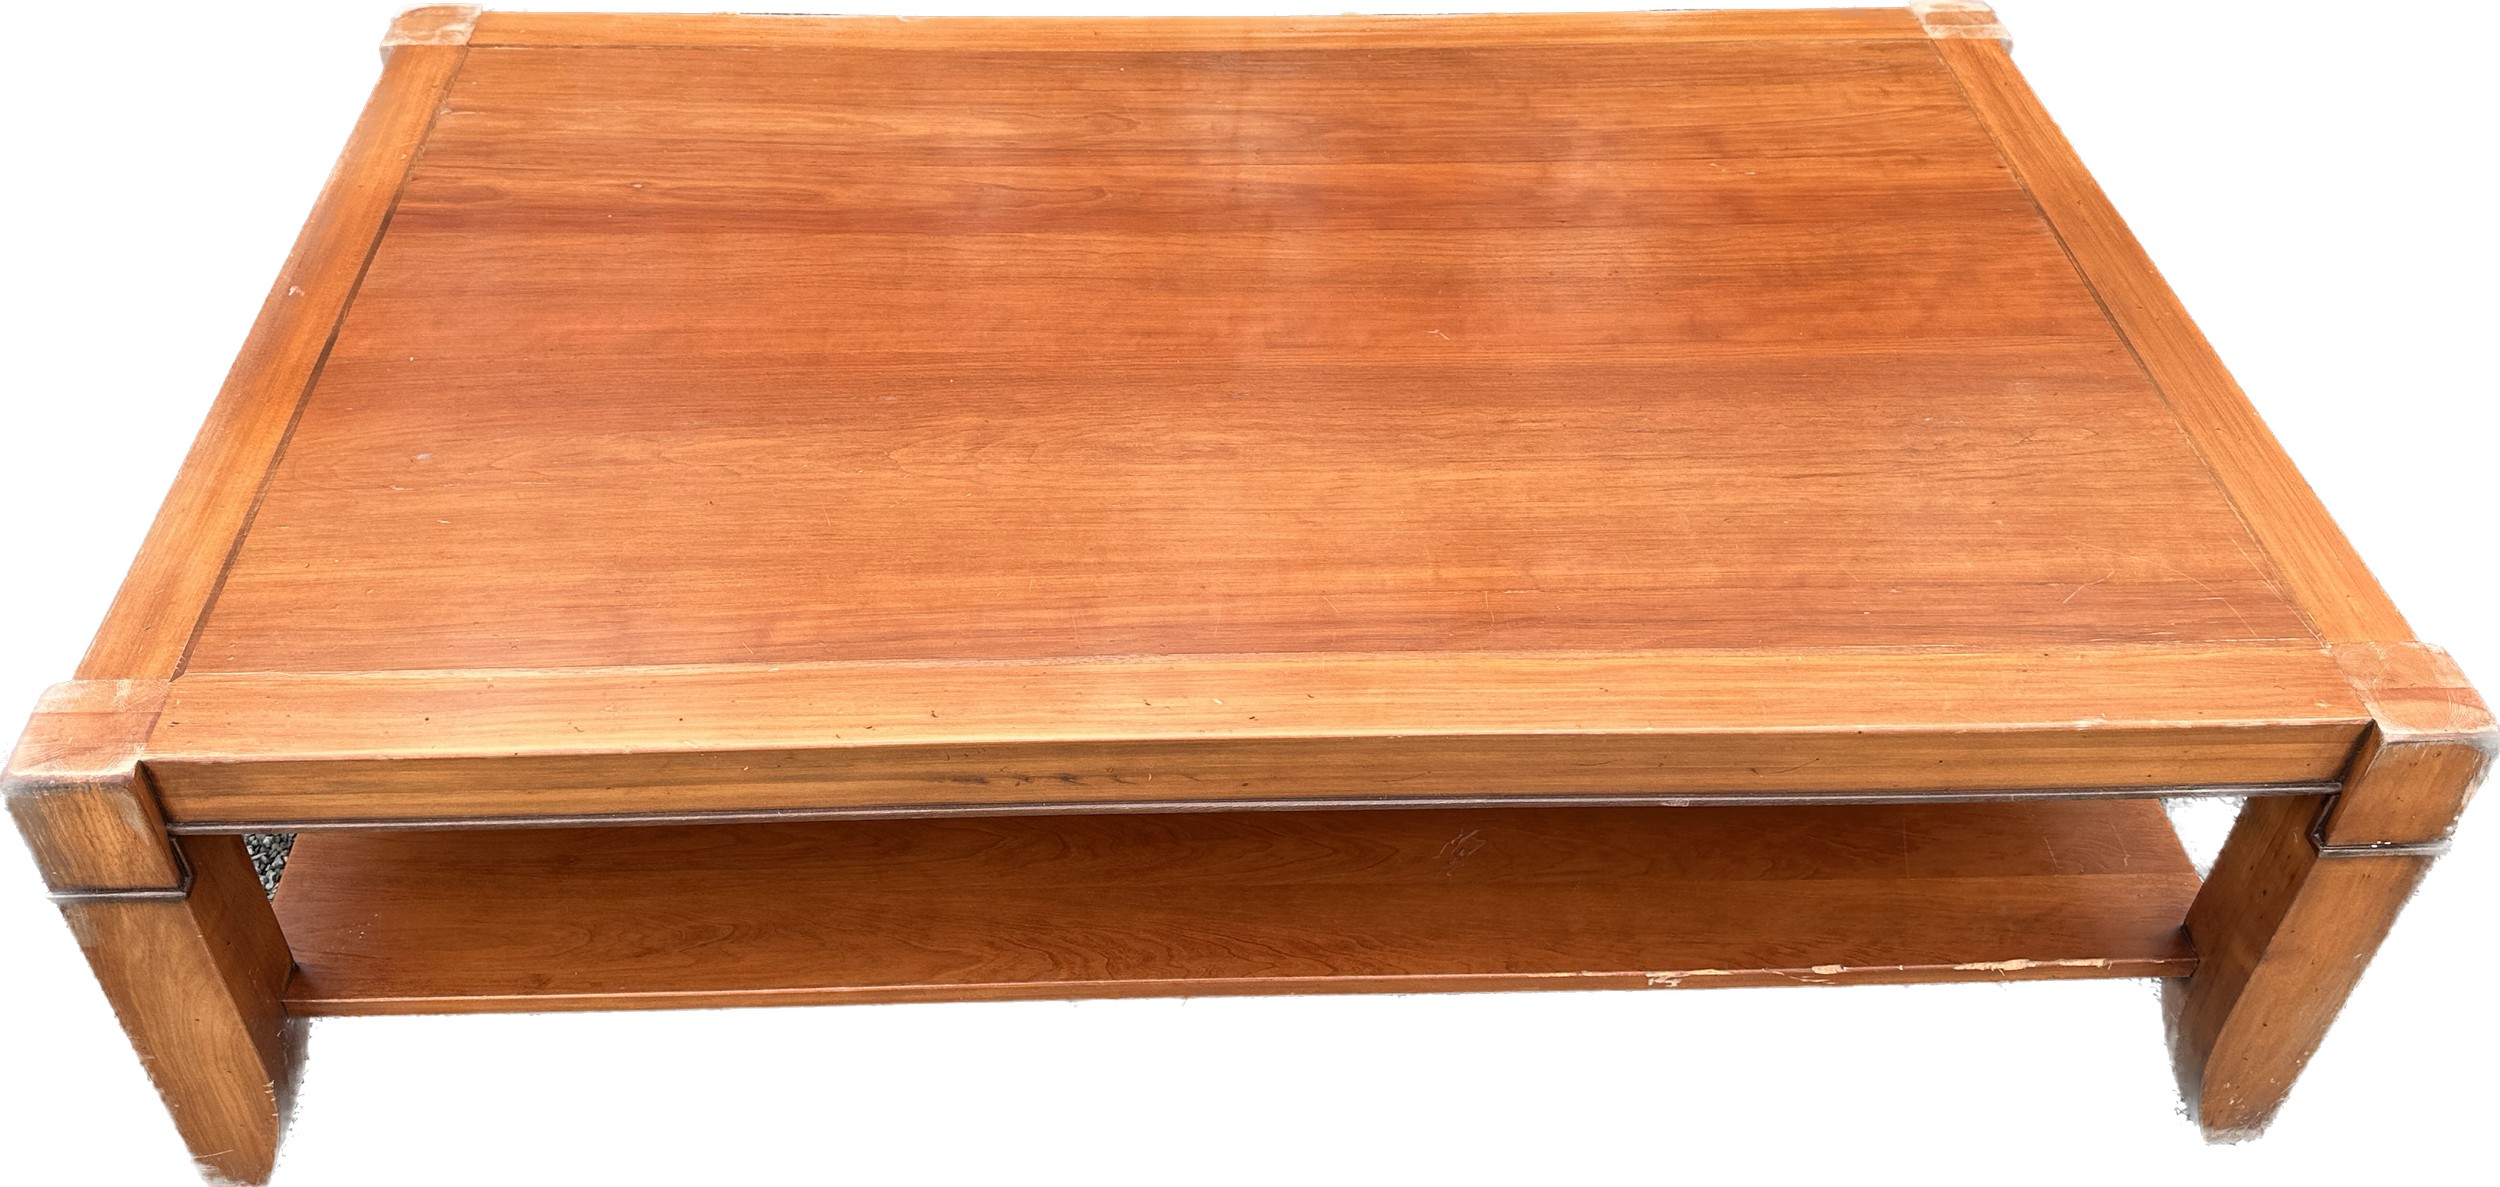 Large 1 shelf cherry wood coffee table measures approx 19 inches tall by 63 inches wide and 39.5 - Image 2 of 3